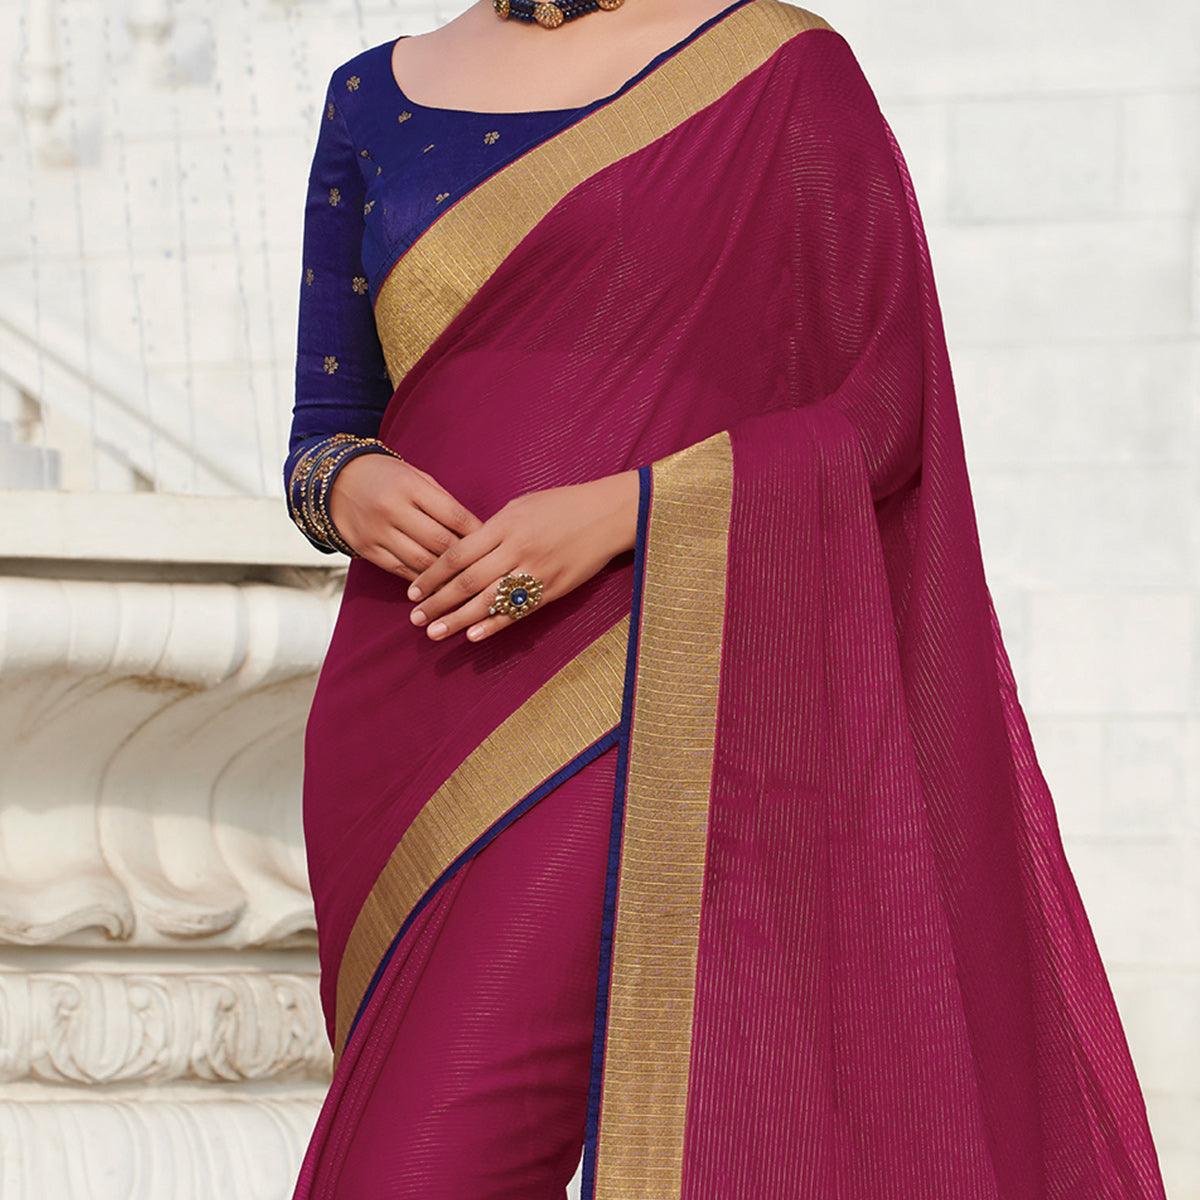 Desirable Dark Rani Pink Colored Party Wear Embroidered Georgette Saree - Peachmode